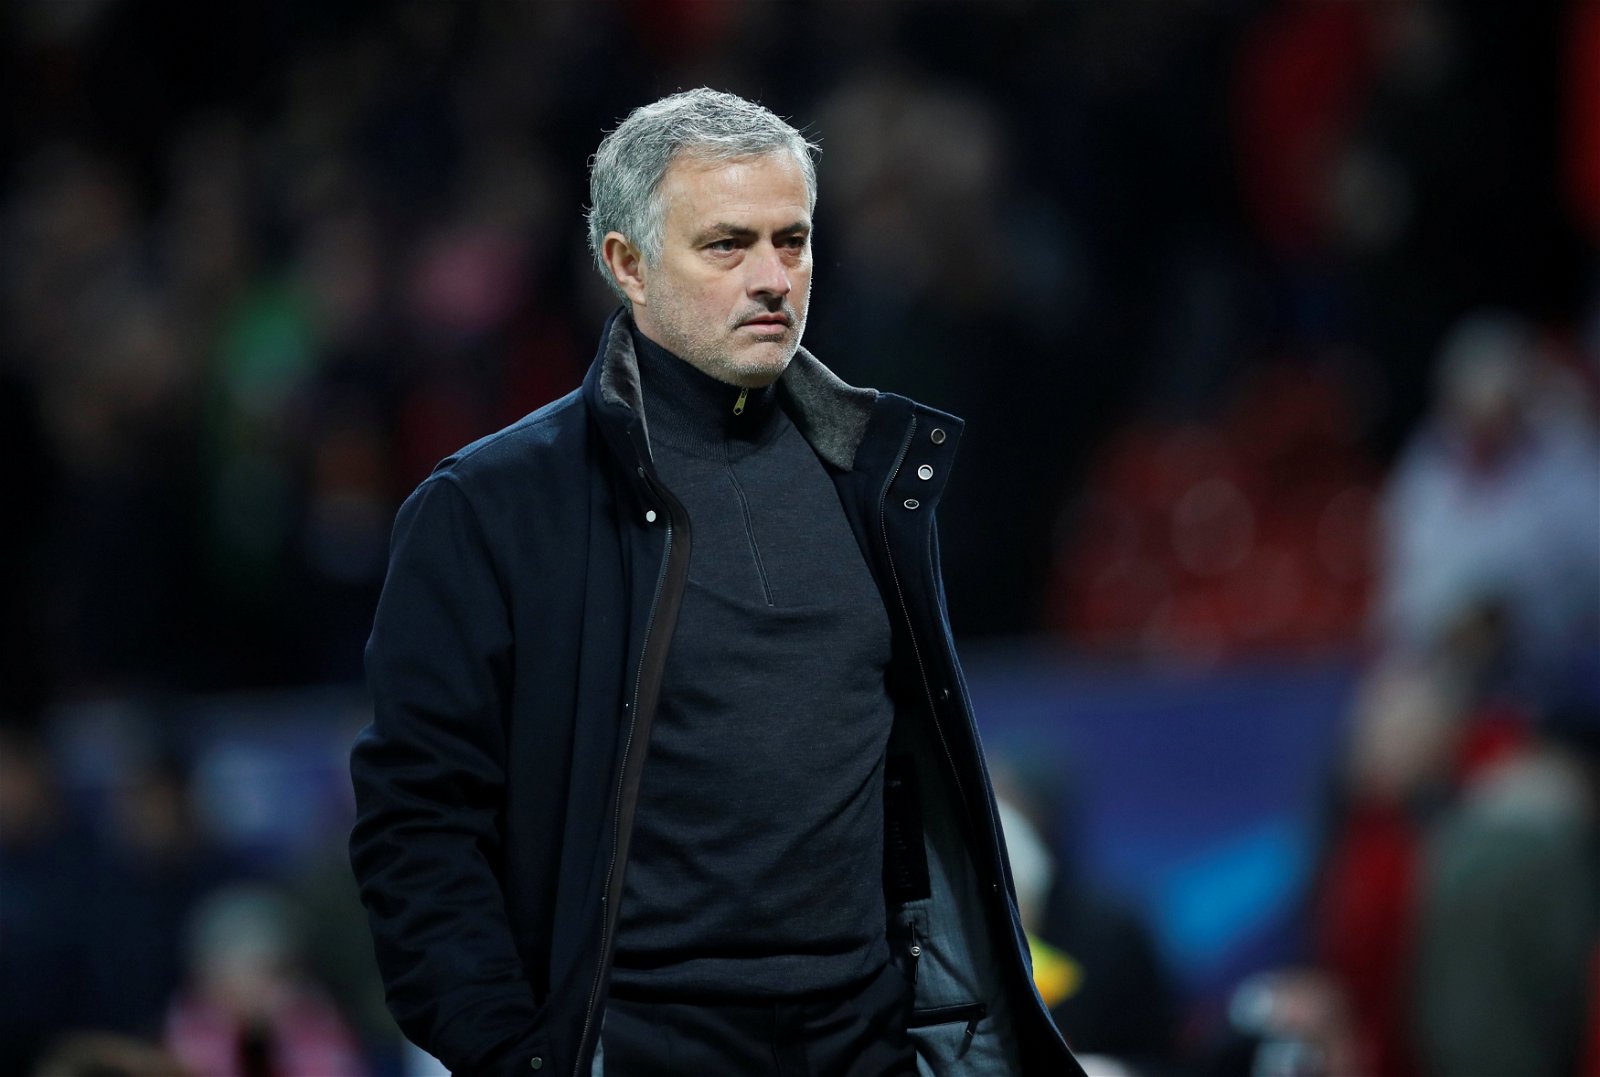 Mourinho told to drop star player after CL exit 1